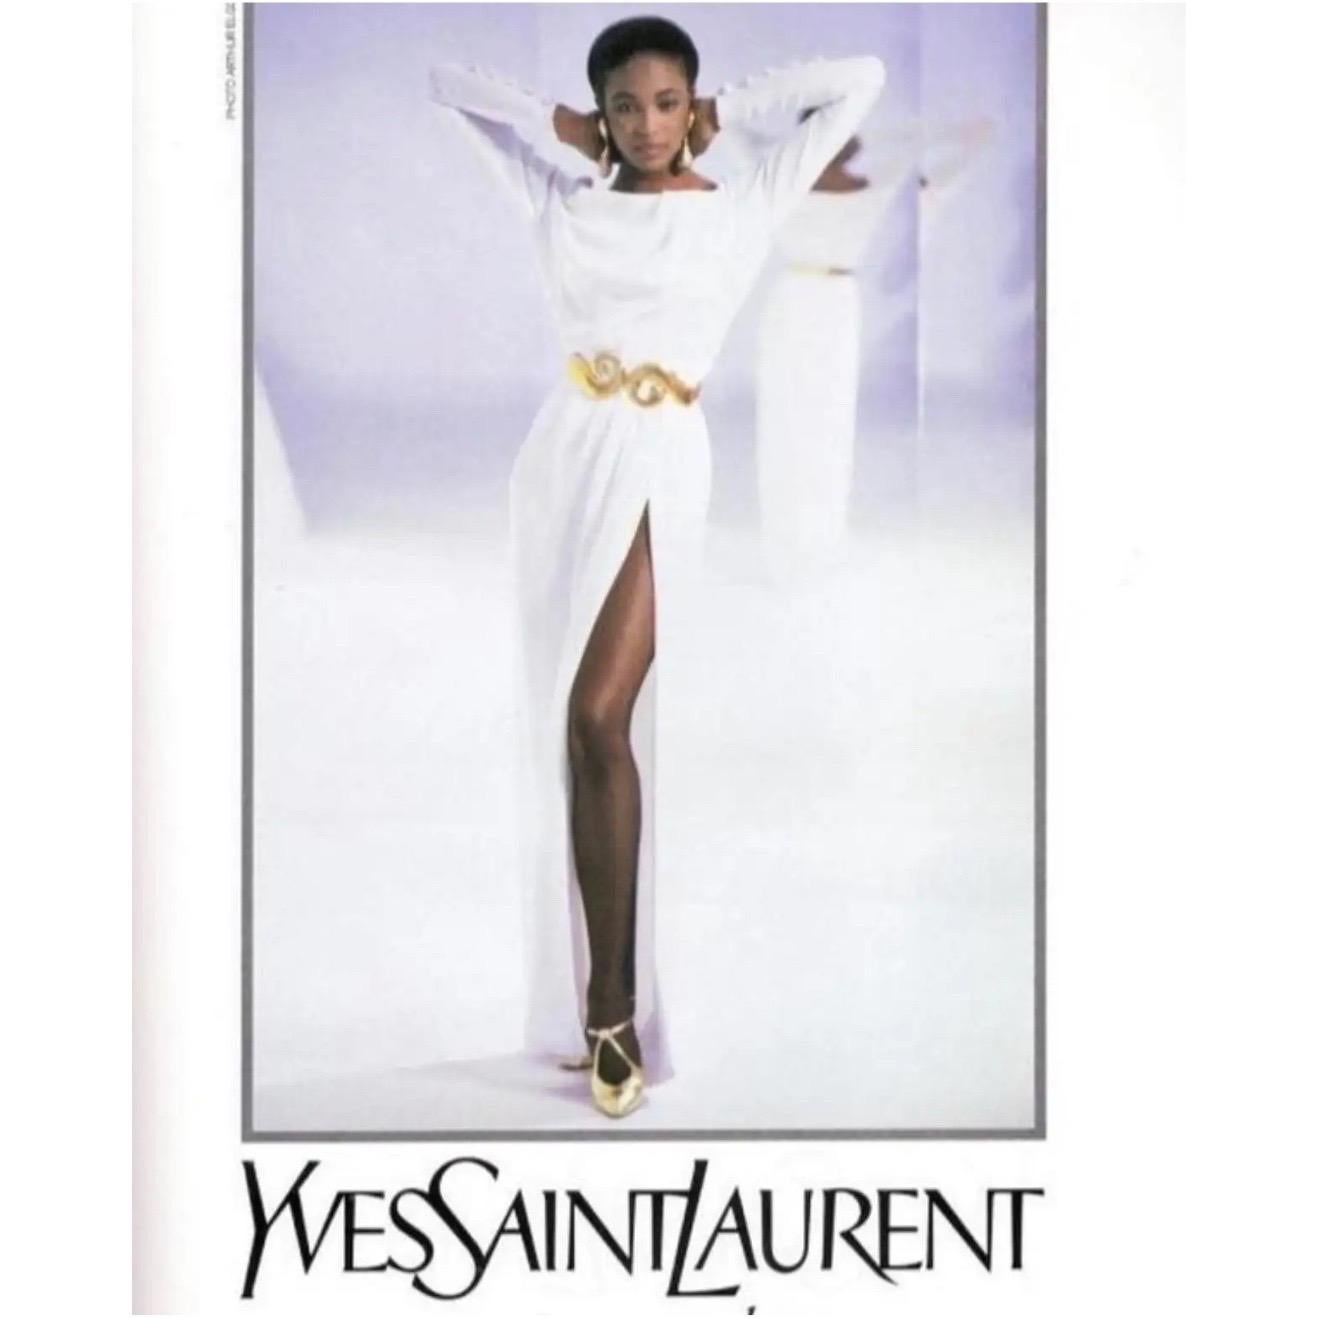 Yves Saint Laurent is renowned for his haute couture and Rive Gauche collections, but his remarkable accessories are also worthy of acclaim. As his admirers and collaborators already know, YSL loved using gold lame fabrics, gold buttons, earrings,